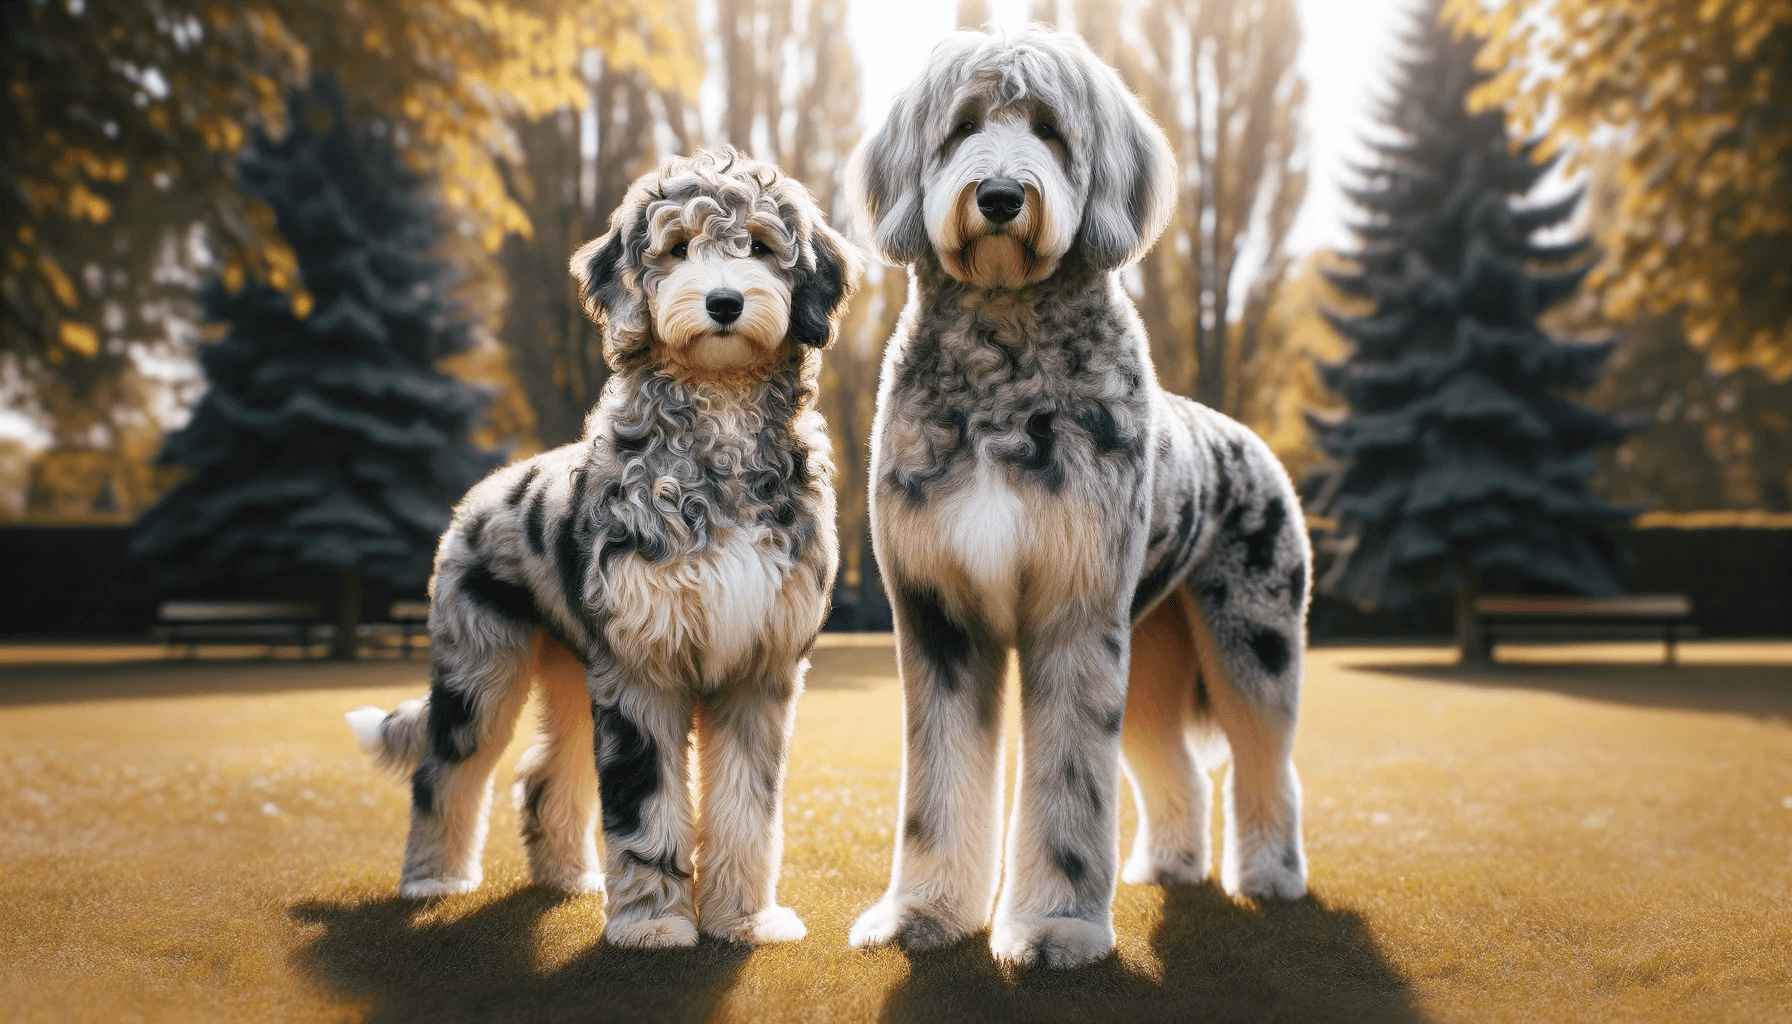 Merle Aussiedoodle standing together, male and female, in a sunny park showcasing the subtle size and build differences.